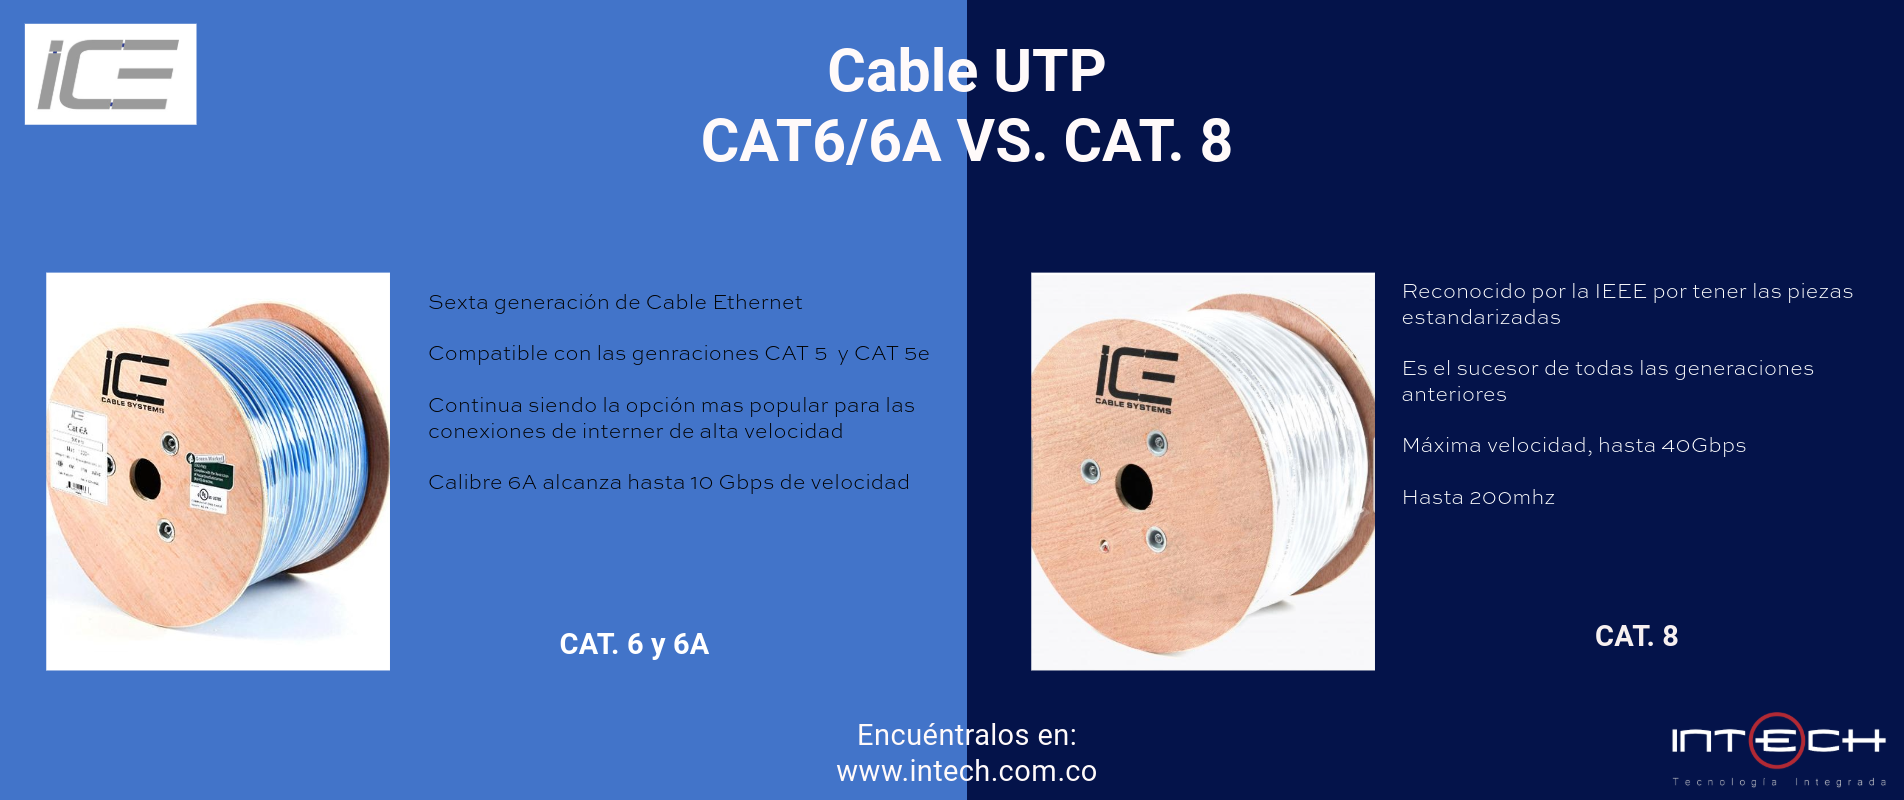 Cable_UTP_ICE_Cable